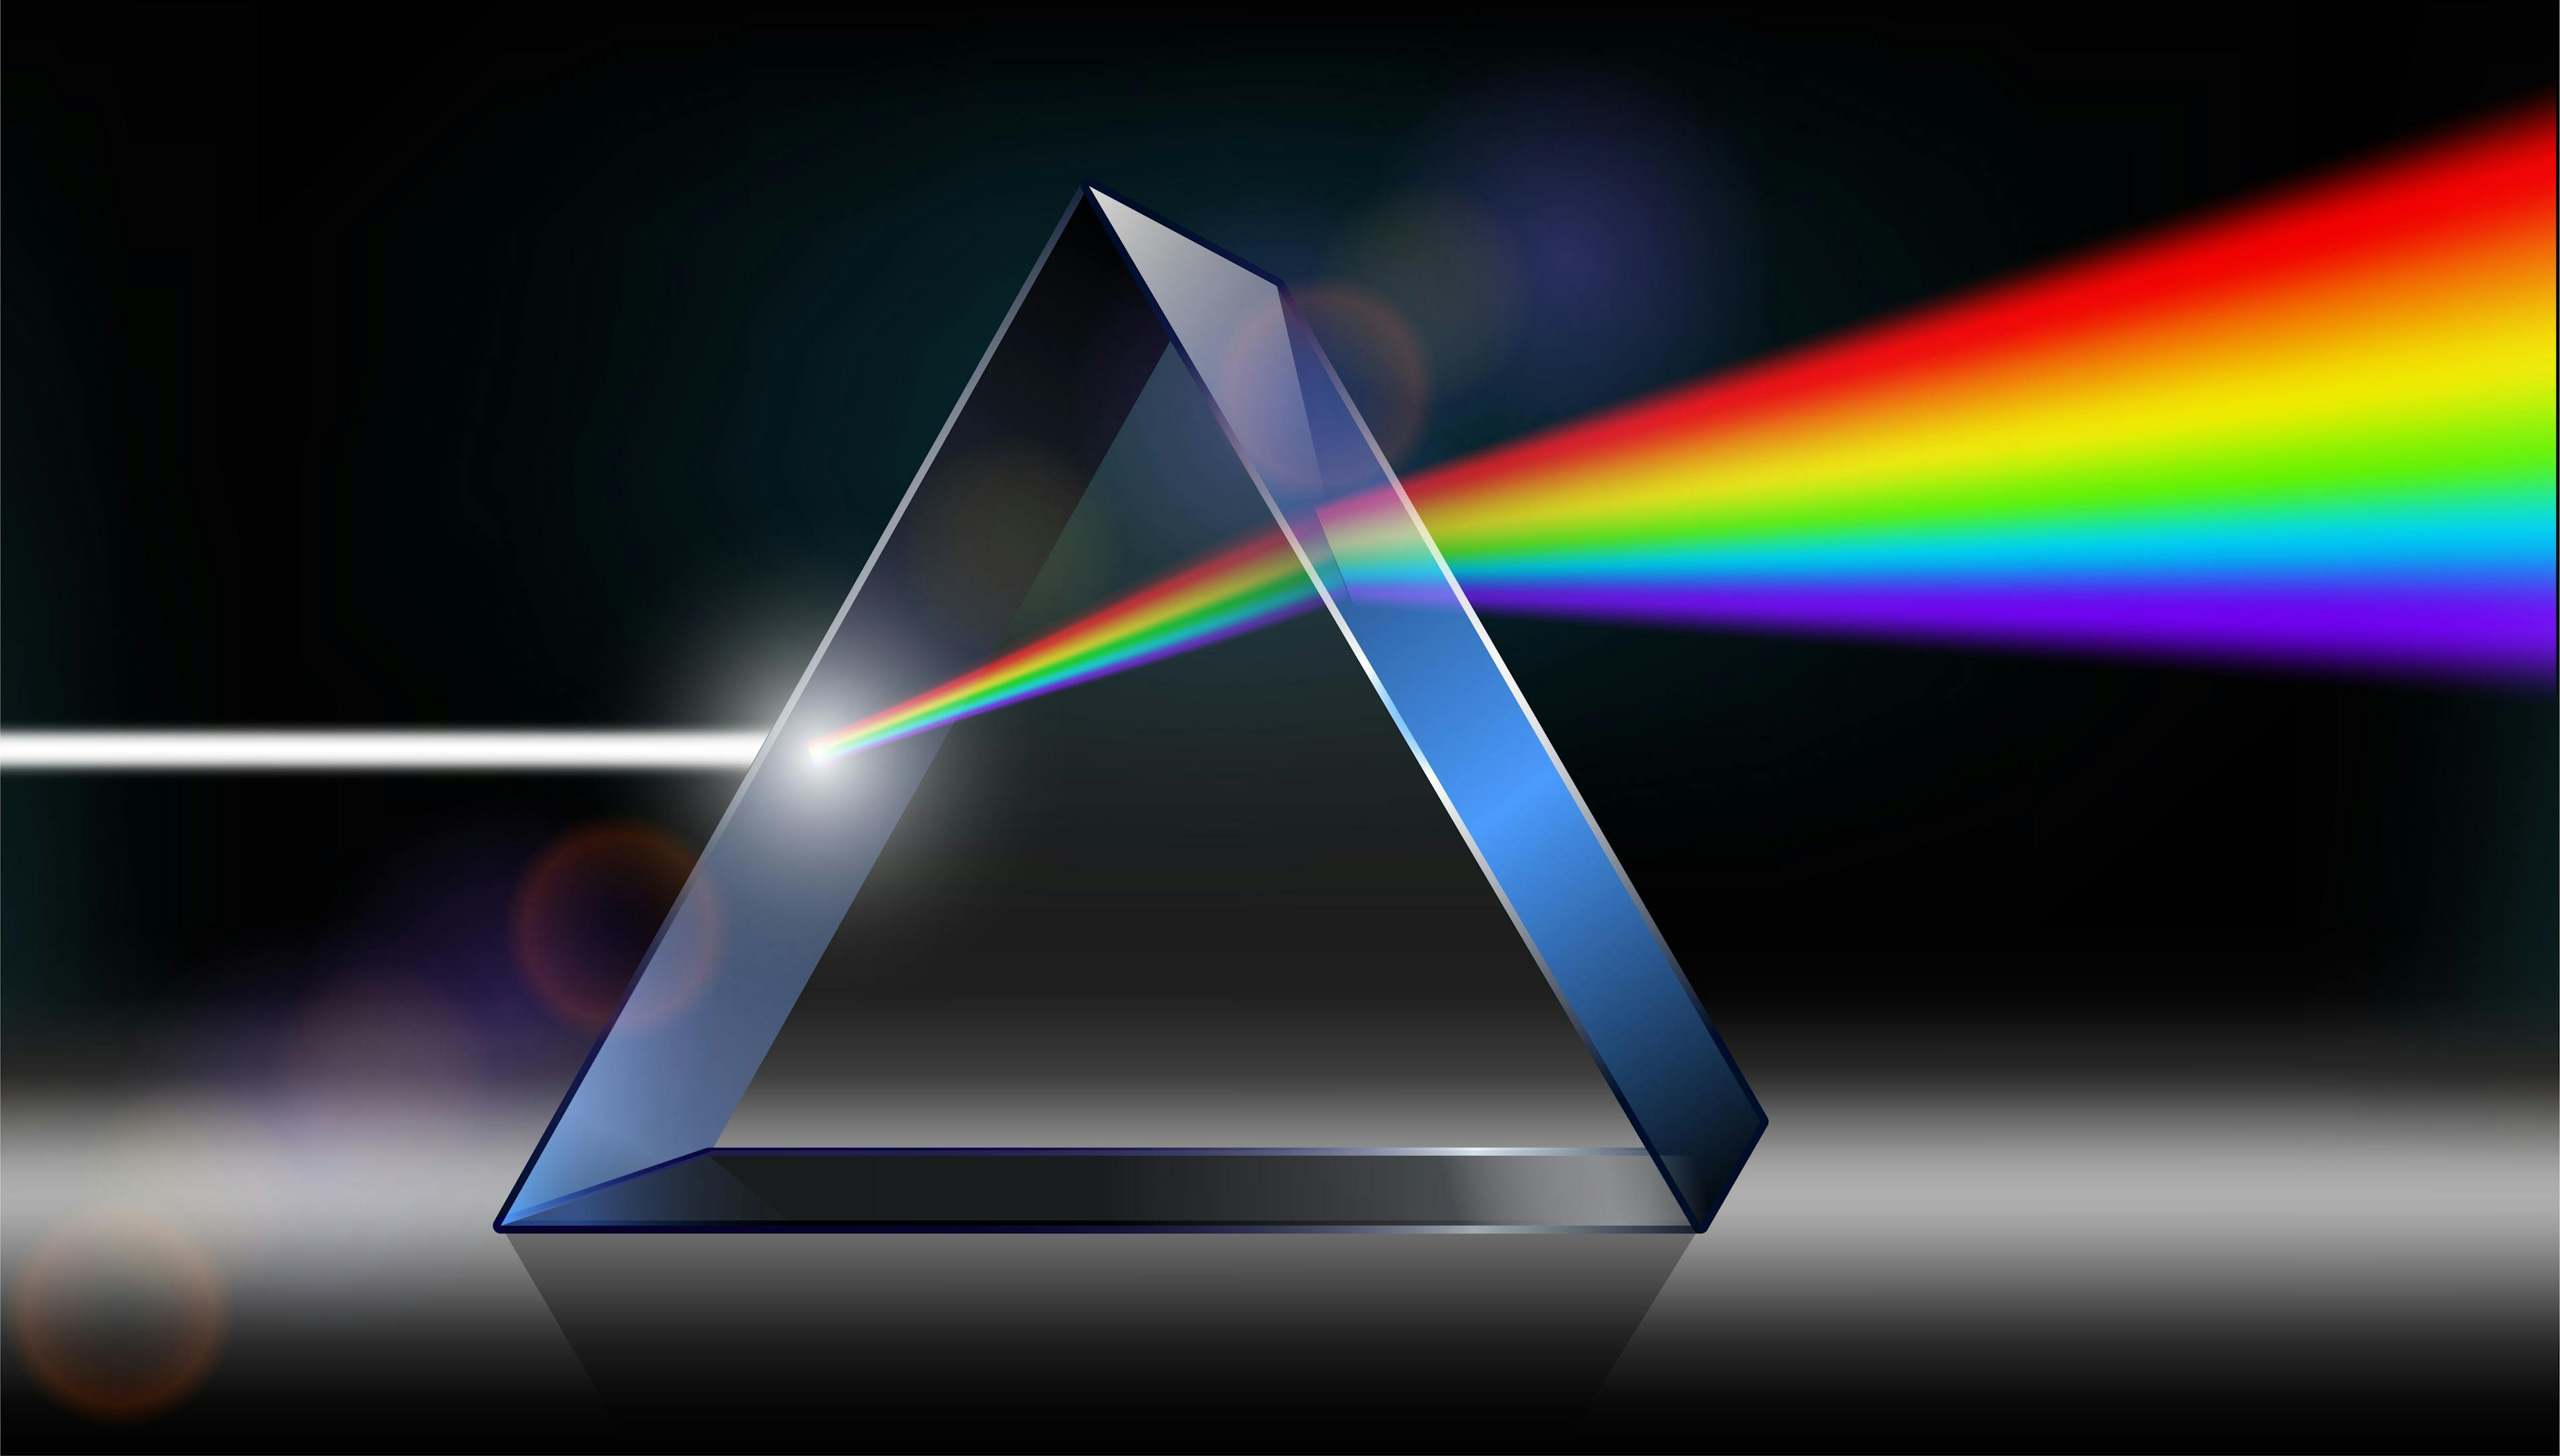 Optics physics. The white light shines through the prism. Produce rainbow colors in 3D illustrator.